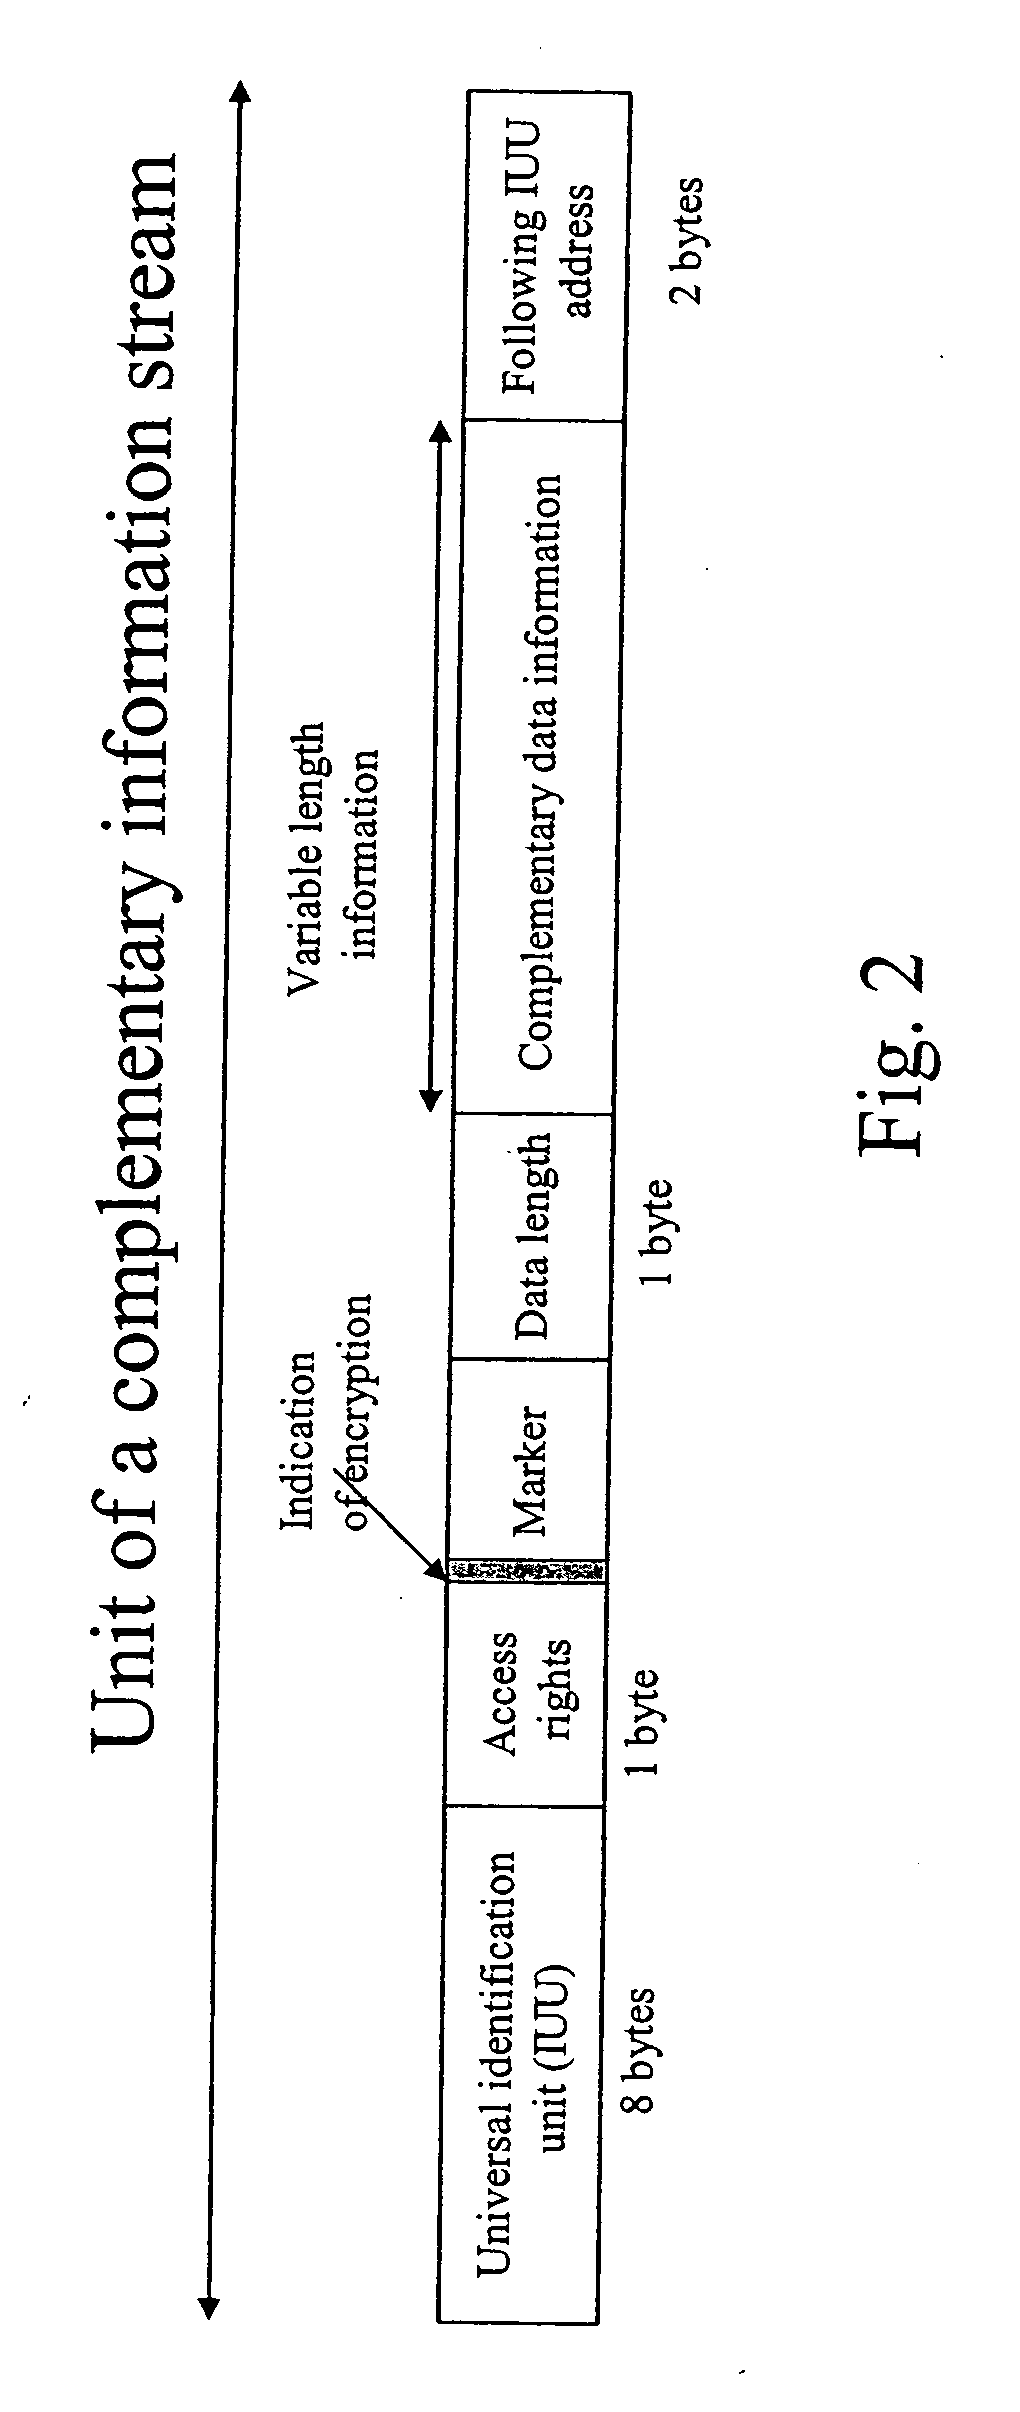 Secure distributed process and system for the protection and distribution of audiovisual streams